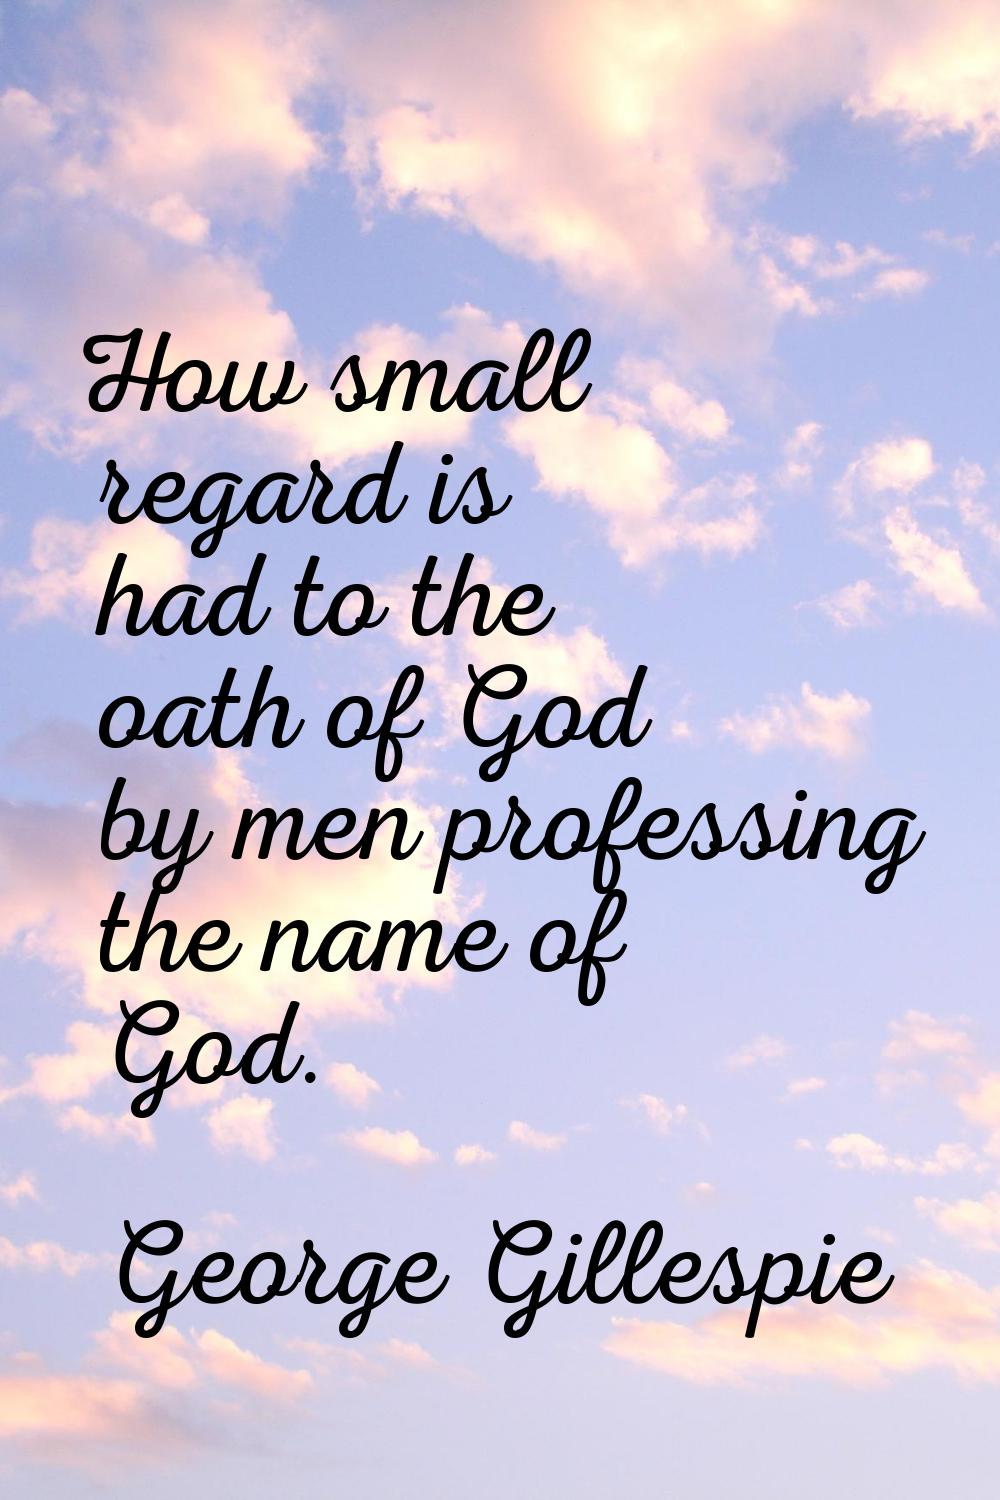 How small regard is had to the oath of God by men professing the name of God.